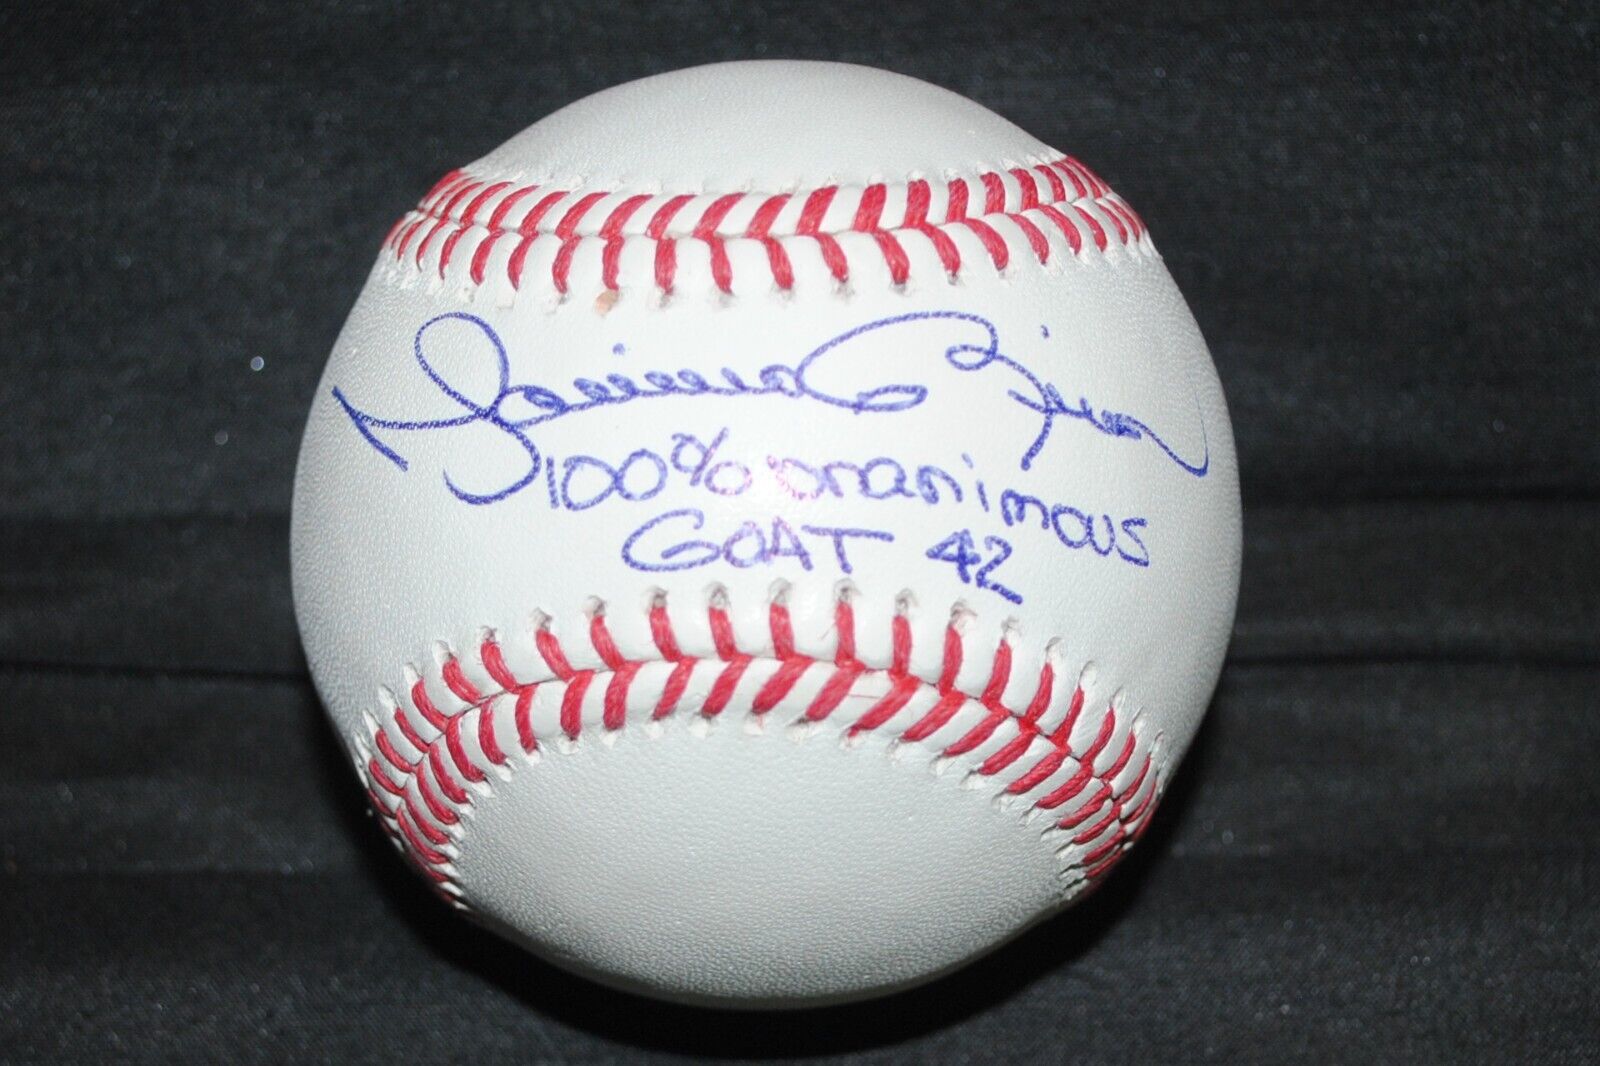 STUNNING MARIANO RIVERA SIGNED OMLB MINT HOF WITH G.O.A.T SCRIPT YANKEES 